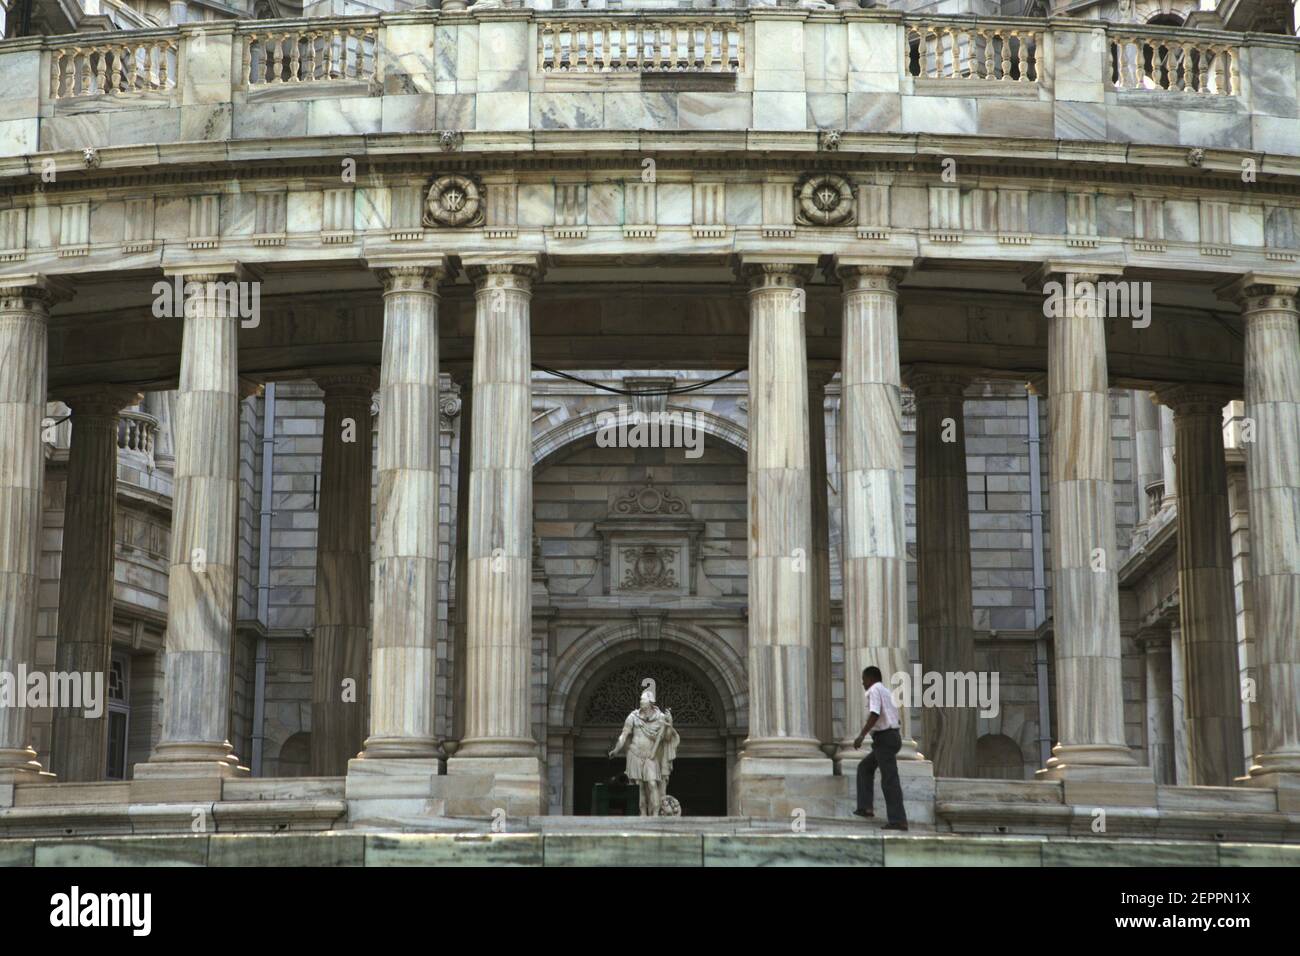 A man visitor stepping toward a statue of Lord Charles (Charles Cornwallis, a British Army general and official) at the Victoria Memorial Hall in Kolkata, West Bengal, India. Stock Photo